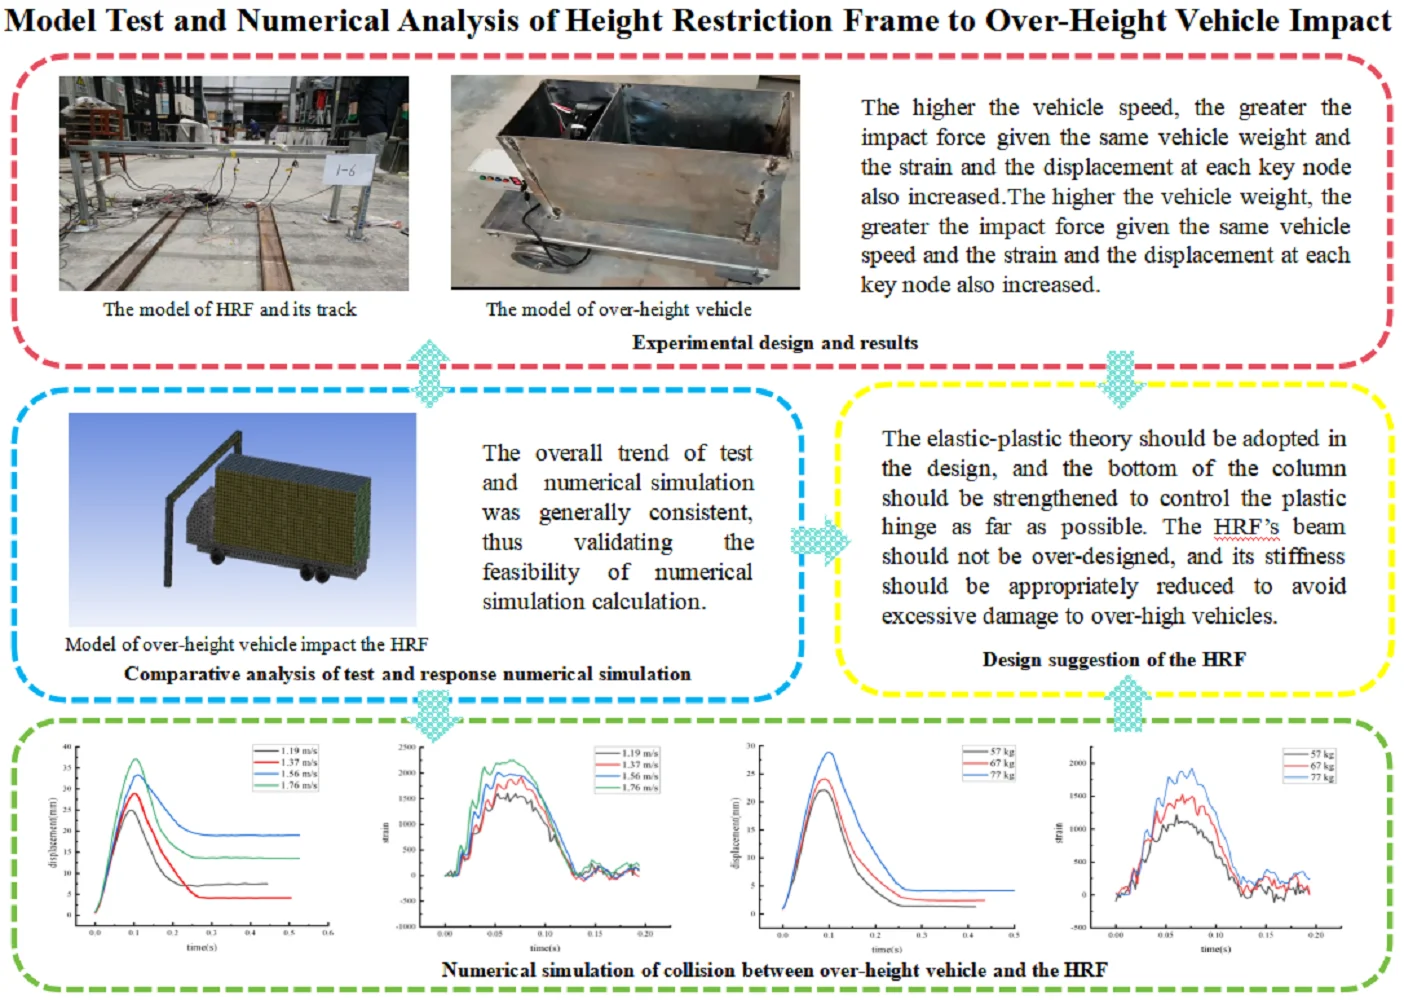 Model test and numerical analysis of height restriction frame to over-height vehicle impact